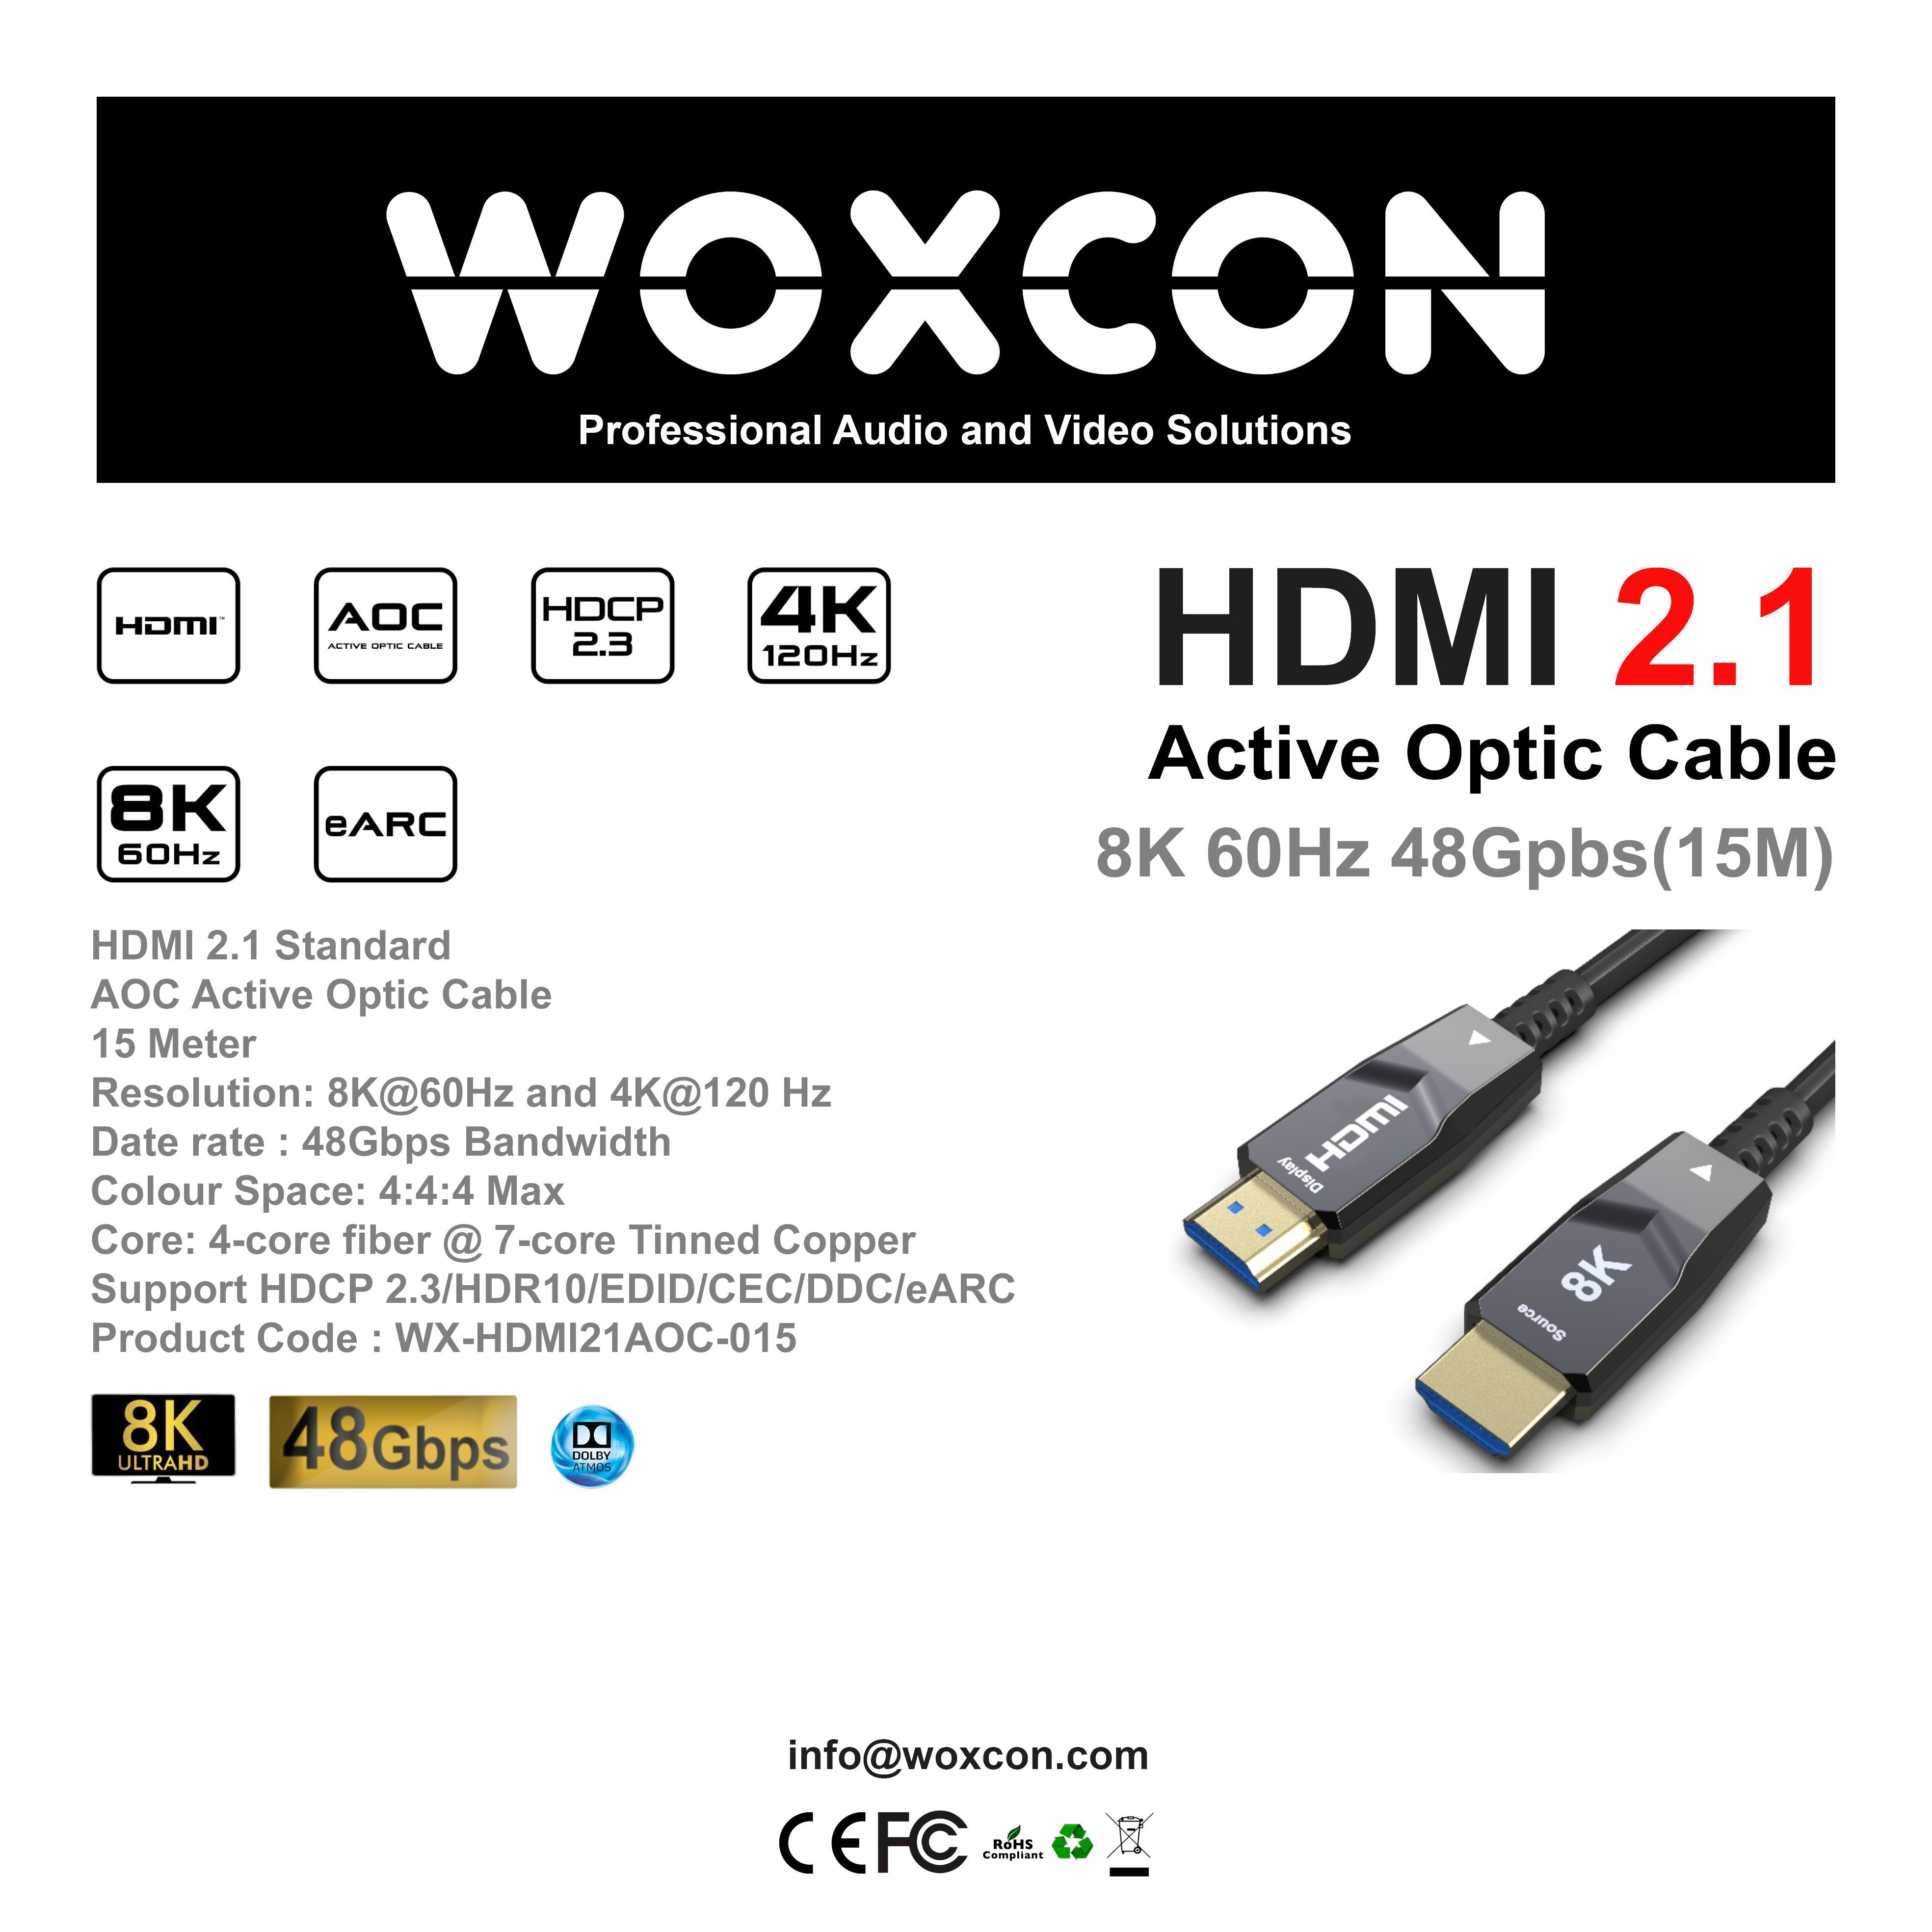 HDMI 2.1 Hybrid Active Optic Cable 8K supported 15 mt